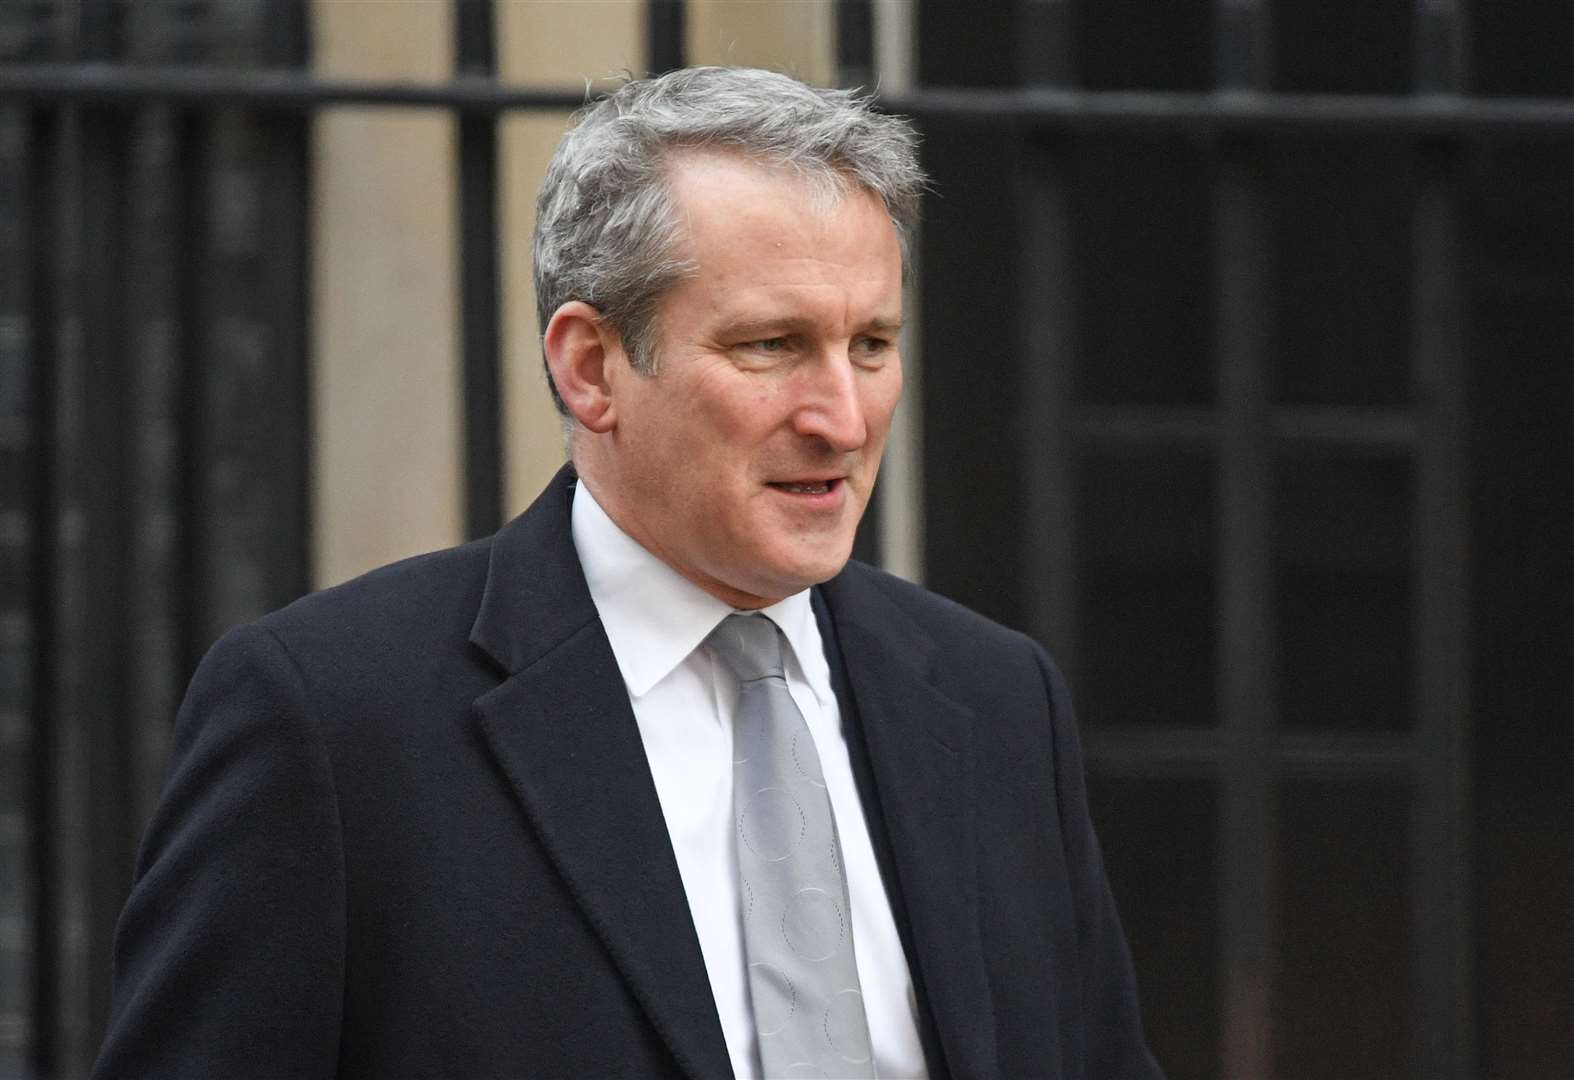 Justice minister Damian Hinds said that rates of self-harm in Wormwood Scrubs are unacceptably high (Stefan Rousseau/PA)